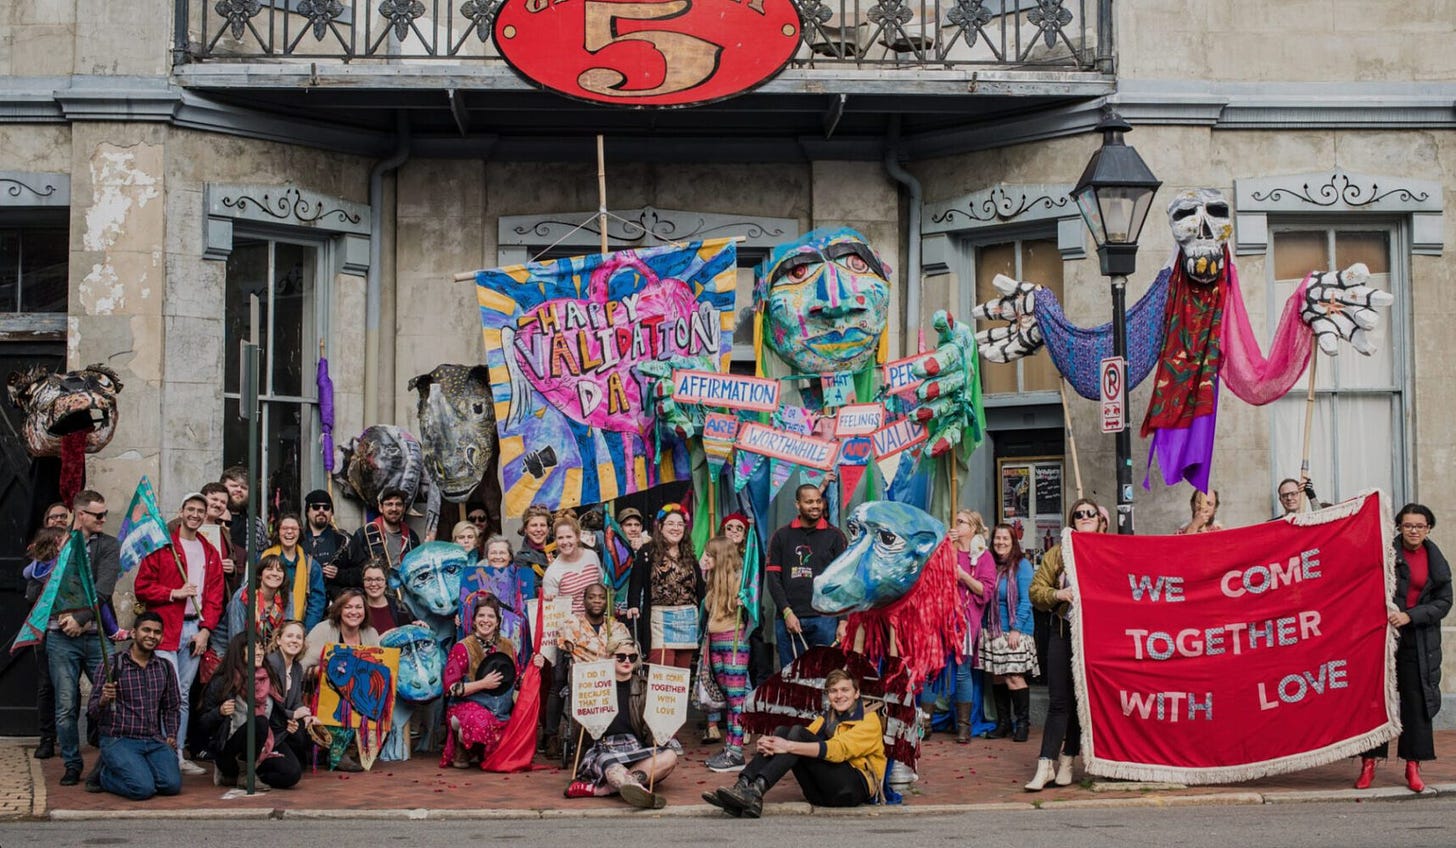 A large group of artists pose for a photo with giant elaborate puppets and banners. One says “WE COME TOGTHER WITH LOVE.”